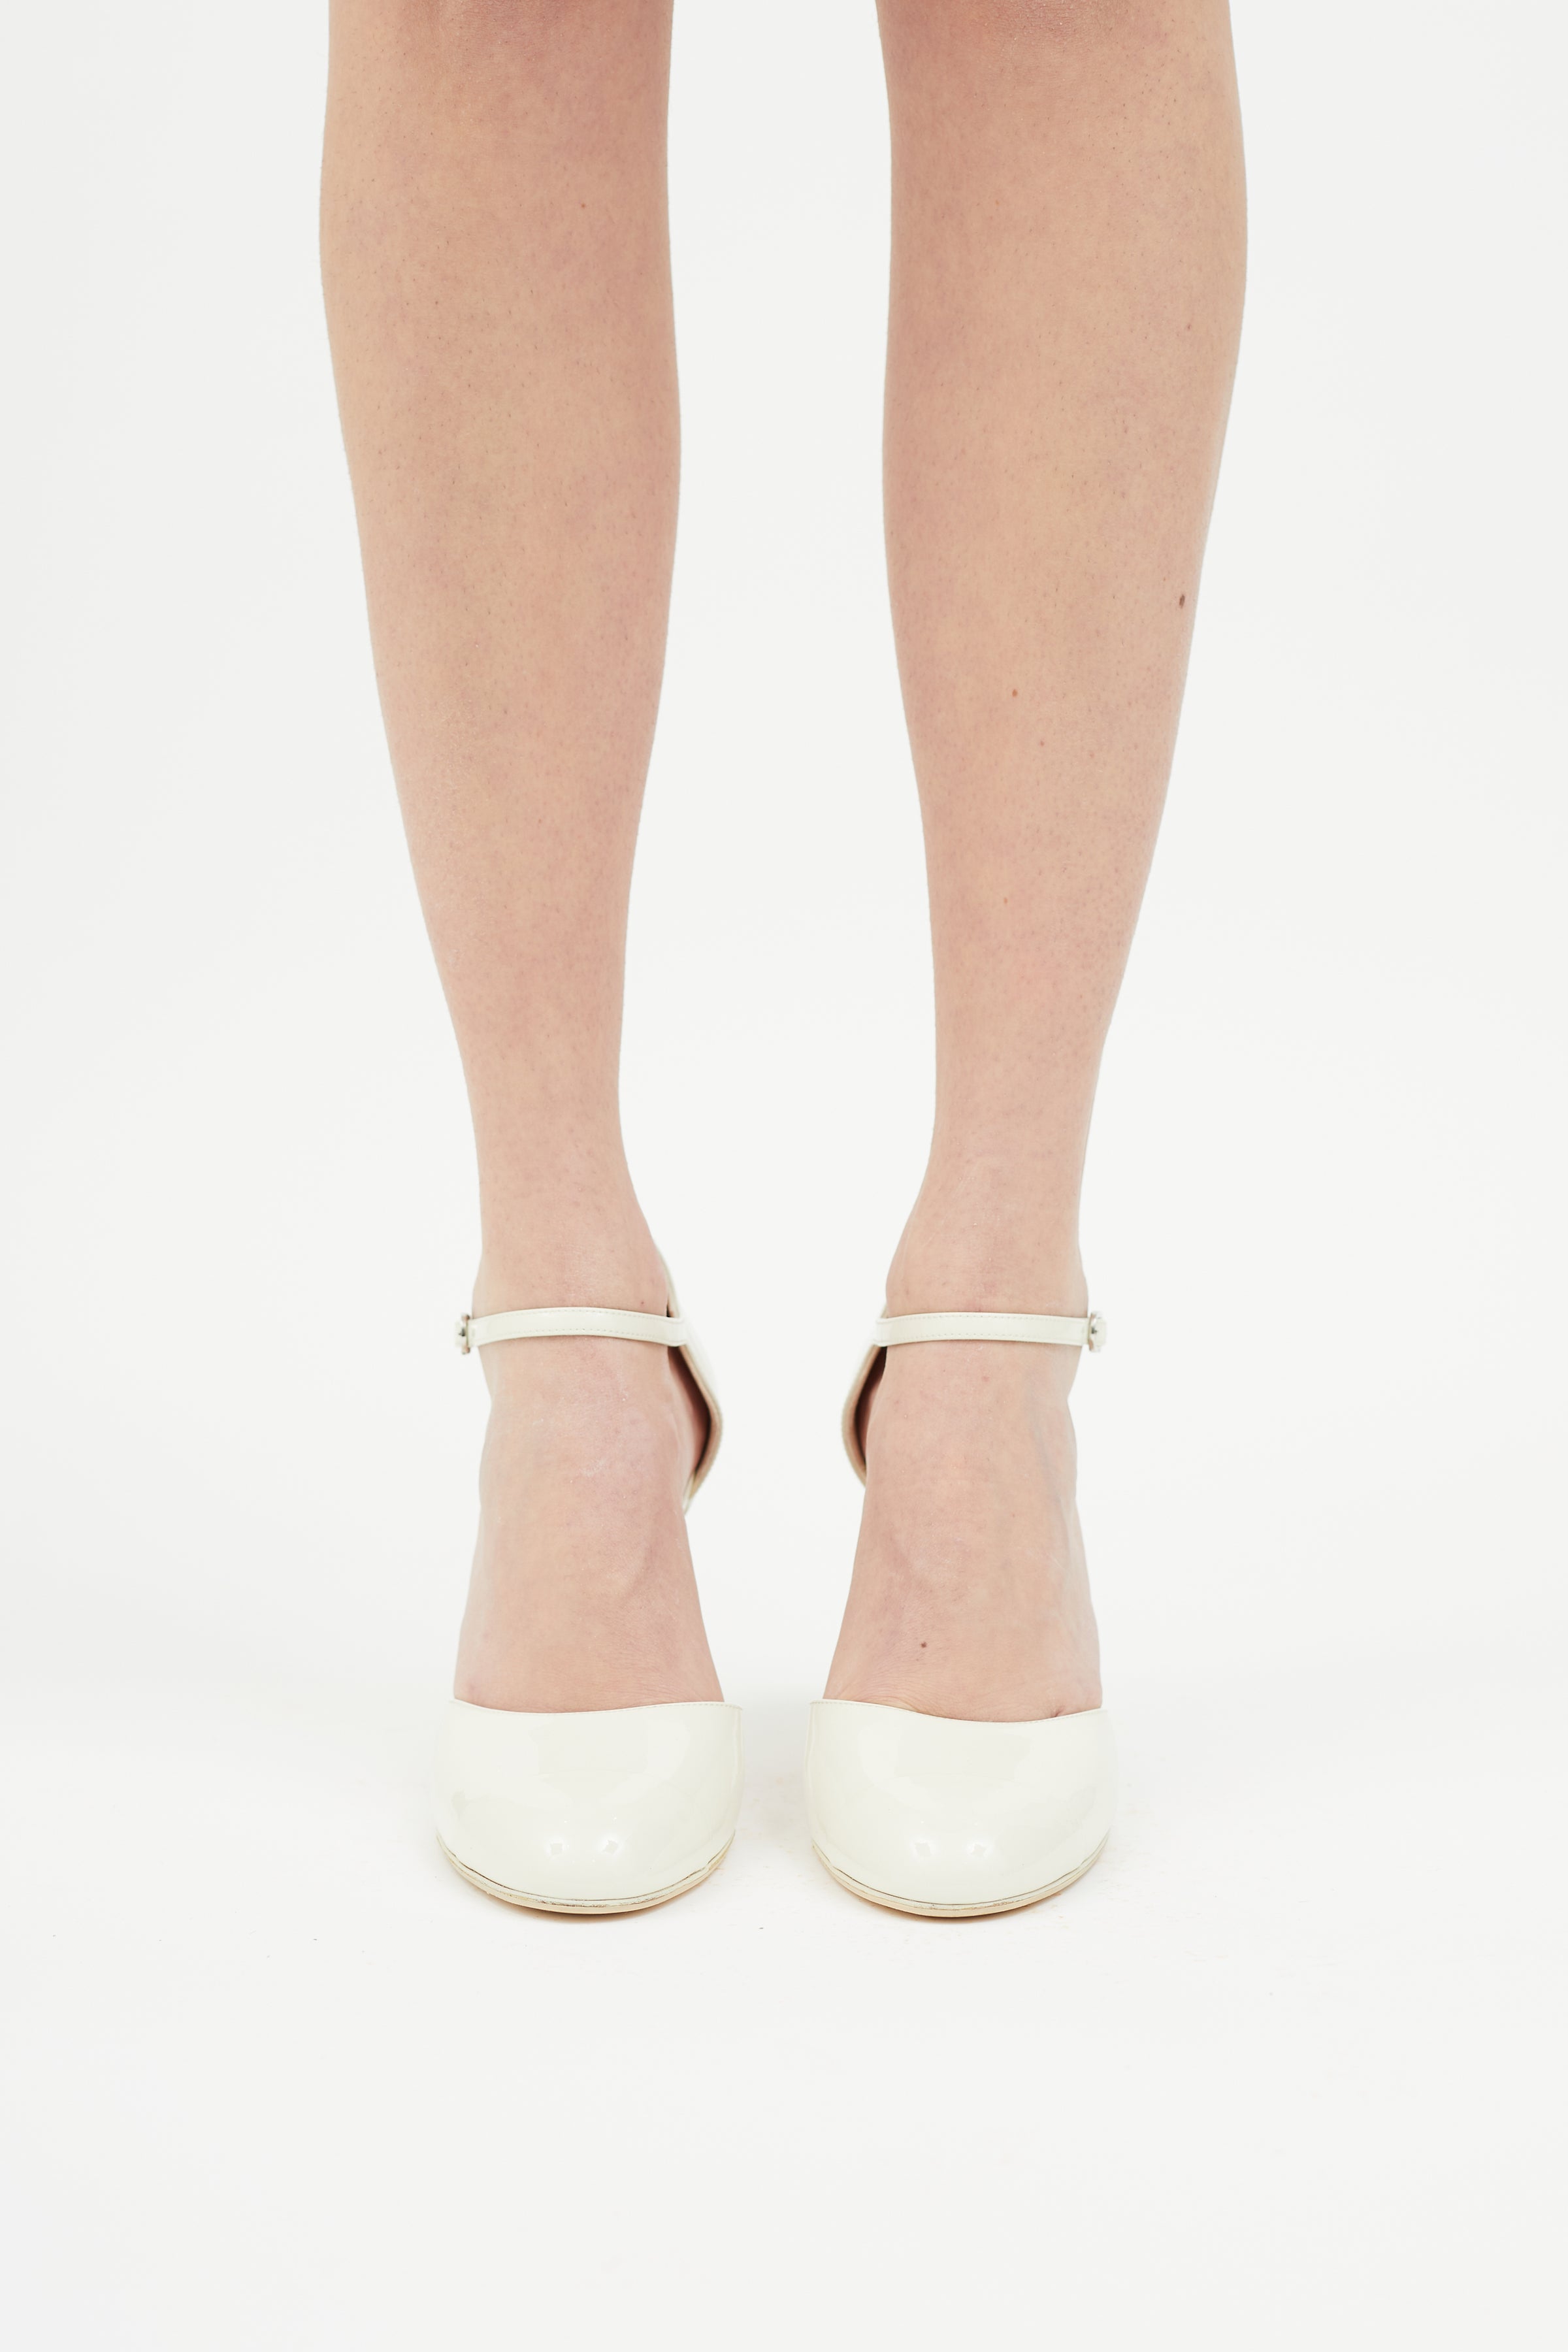 Louis Vuitton // White Patent Bow Heels – VSP Consignment